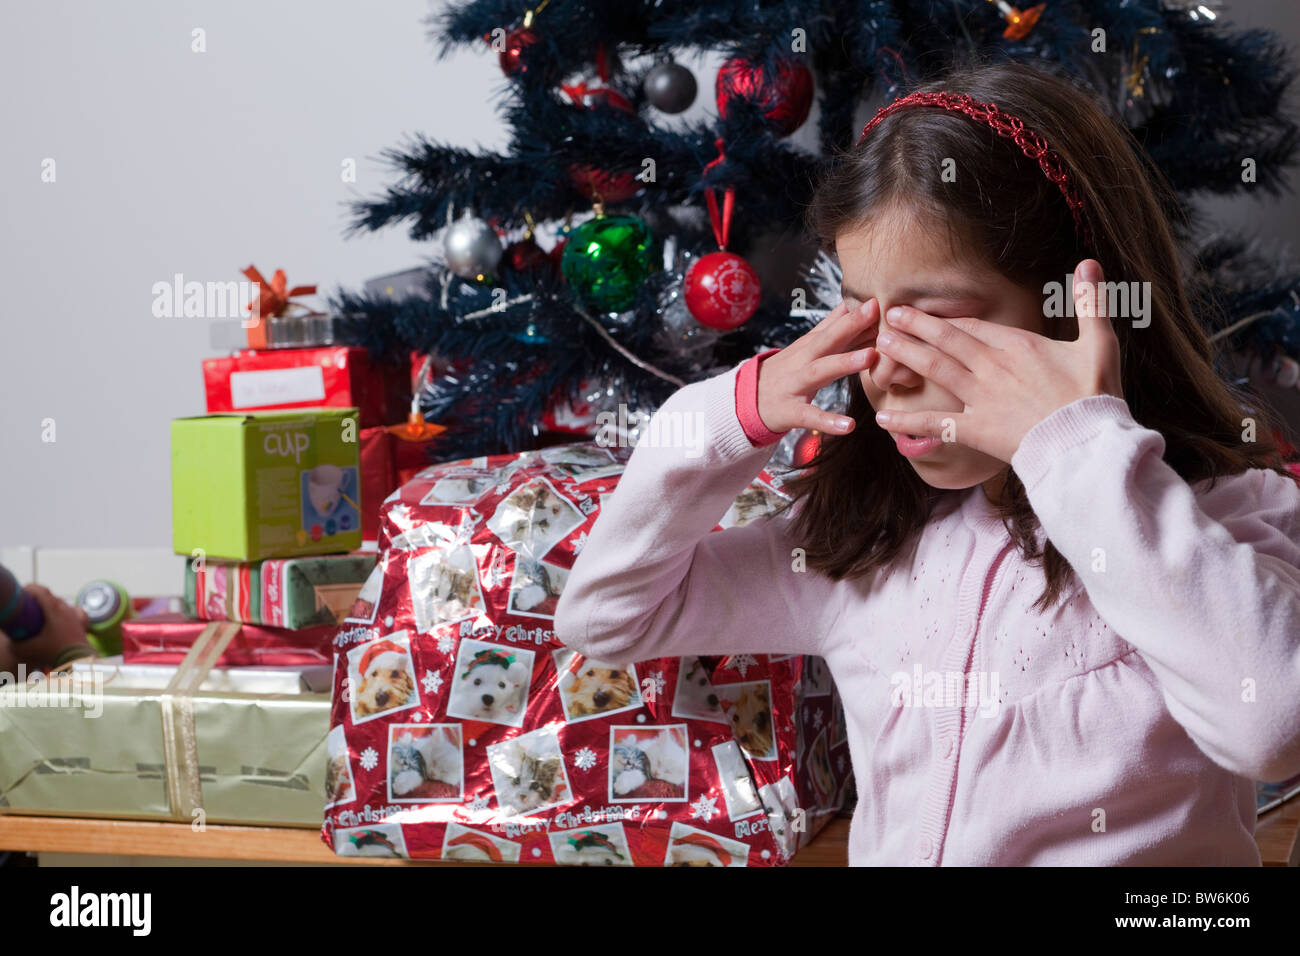 Child covers her eyes waiting for surprise Christmas gift Stock Photo